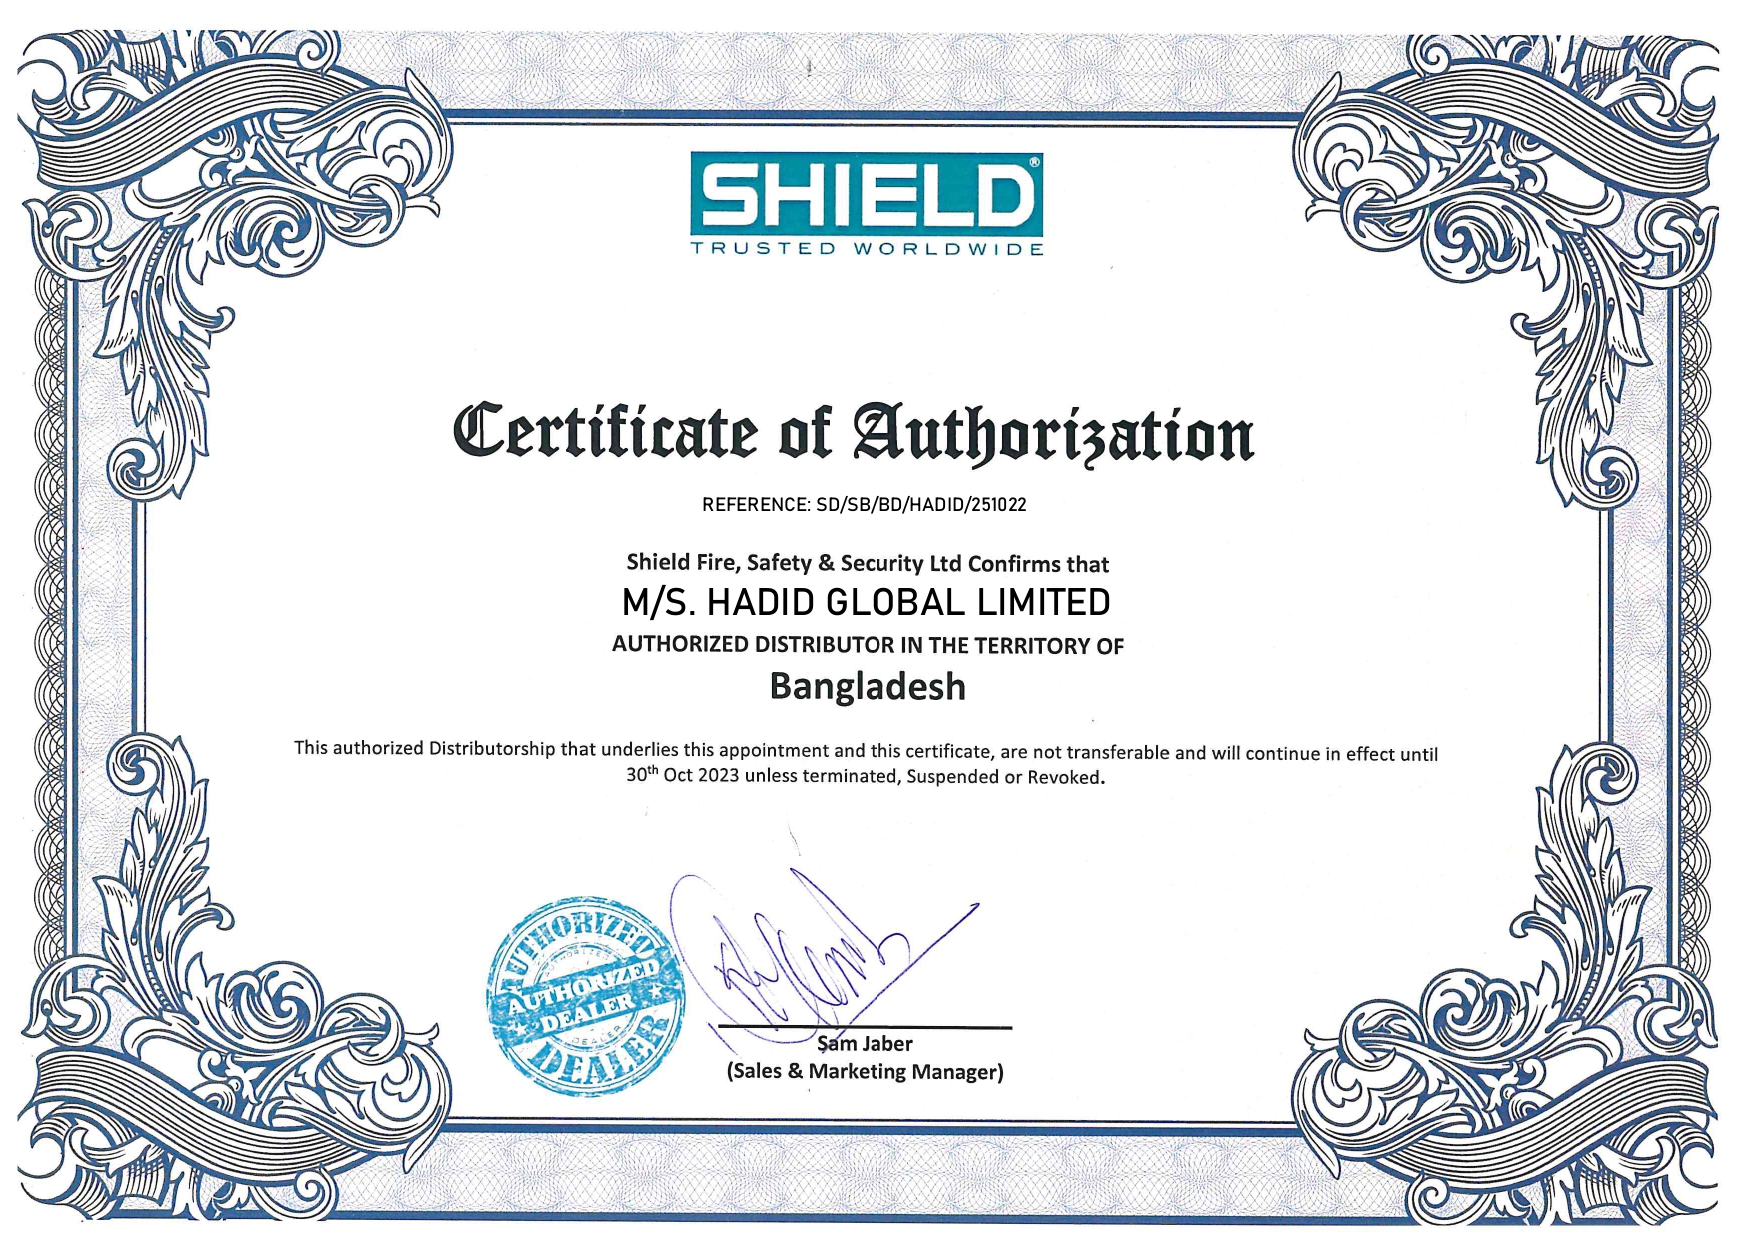 SHIELD CERTIFICATE OF AUTHORISATION